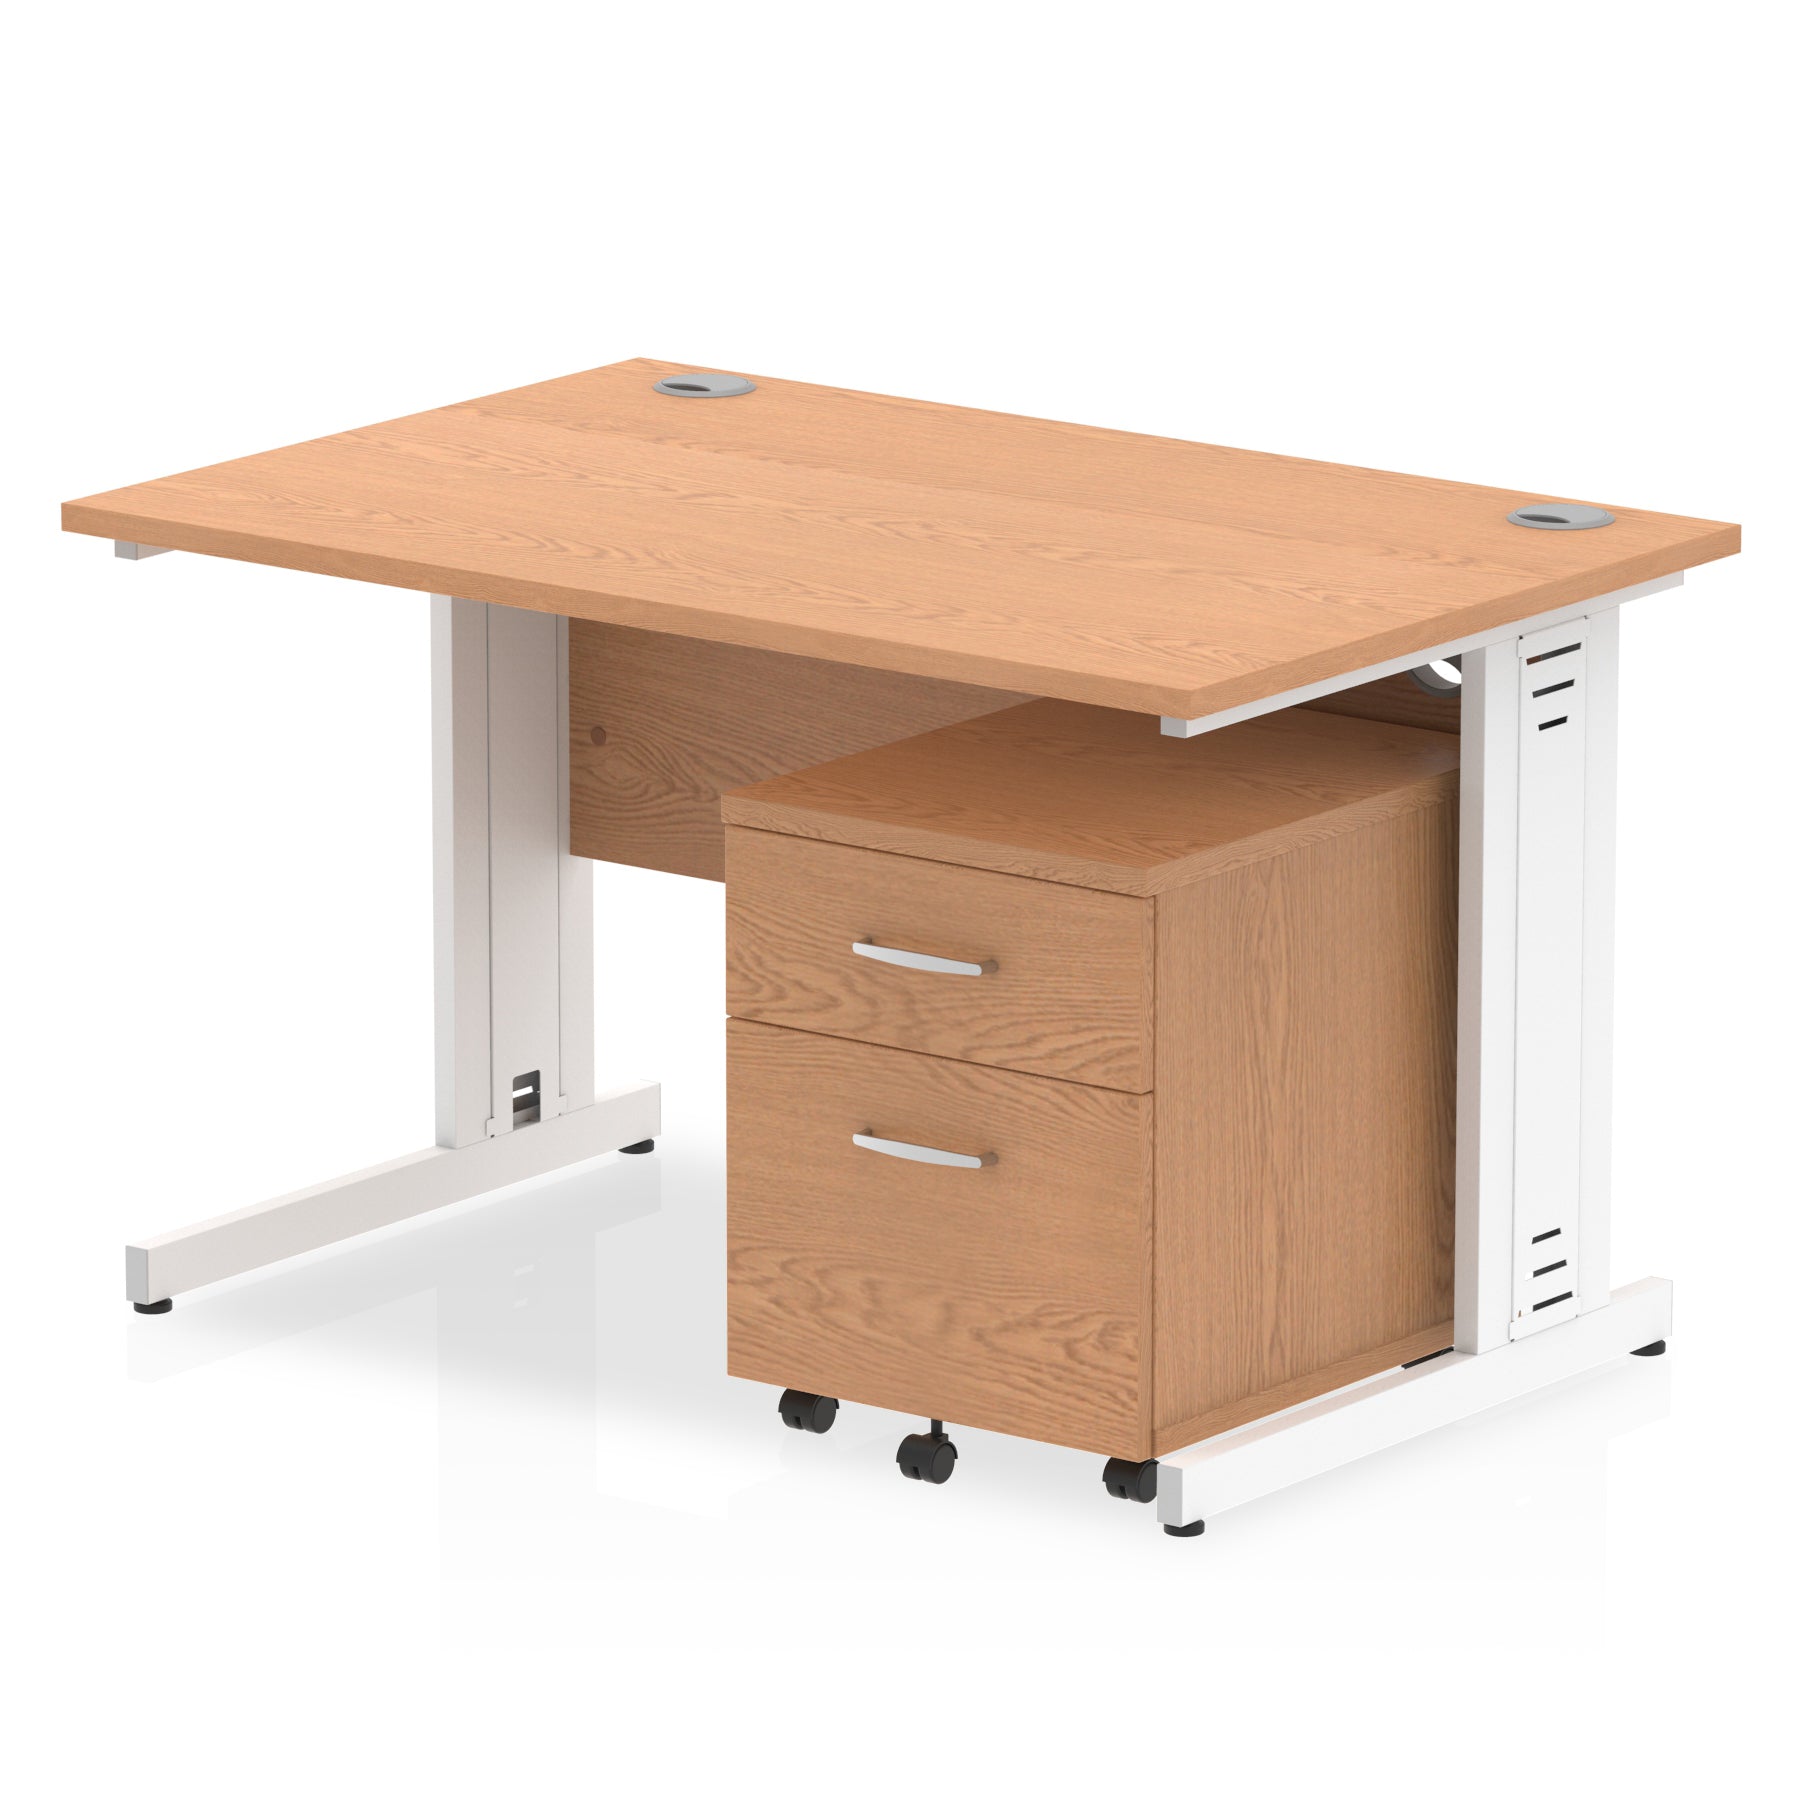 Impulse 1200mm Cable Managed Straight Desk w/ Mobile Pedestal - MFC Rectangular, Self-Assembly, 5-Year Guarantee, Silver/White Frame, Lockable Drawers